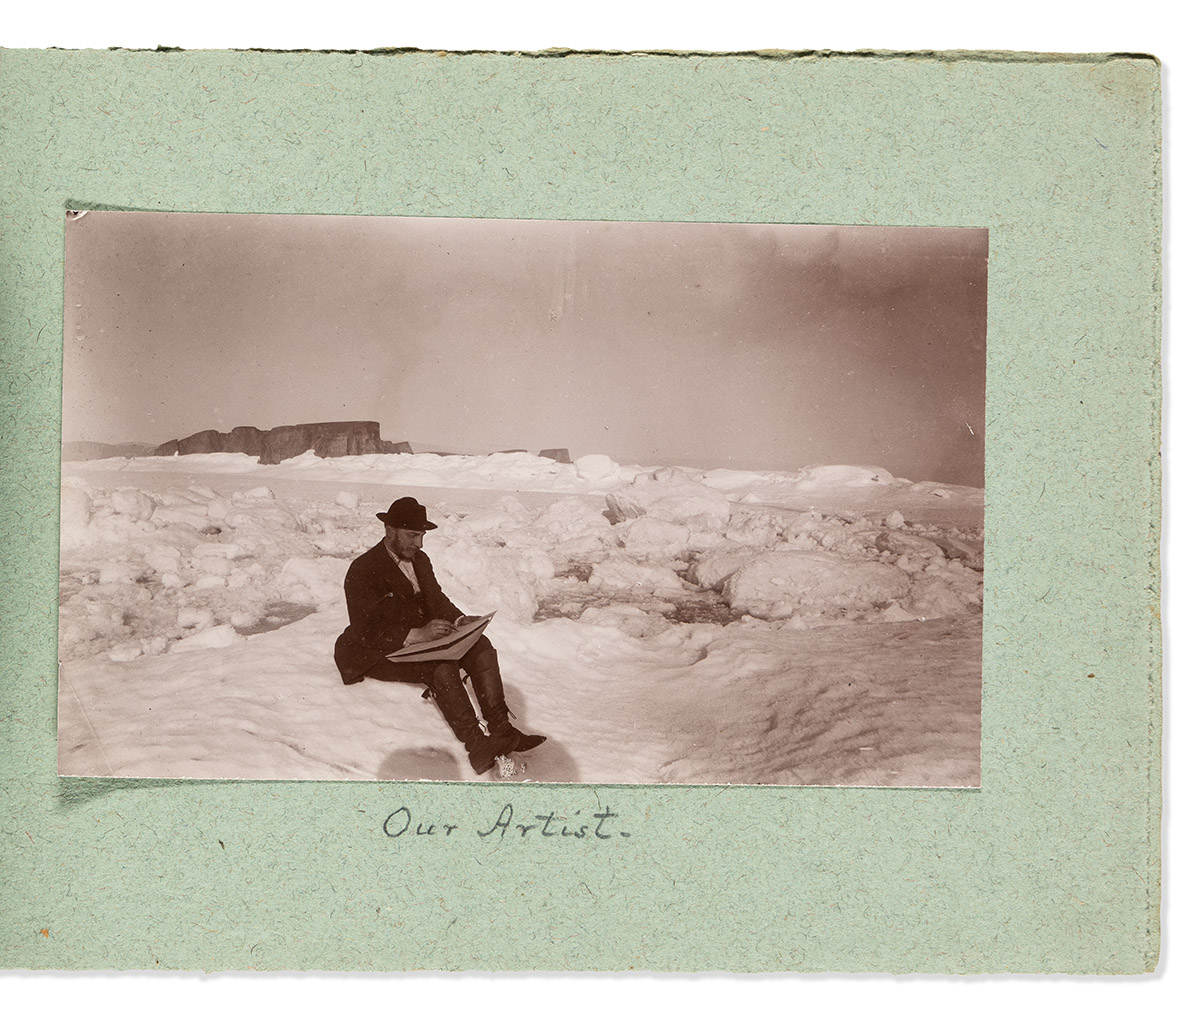 (ARCTIC.) Arthur M. Dodge. Album compiled by the photographer of Pearys sixth Greenland expedition.